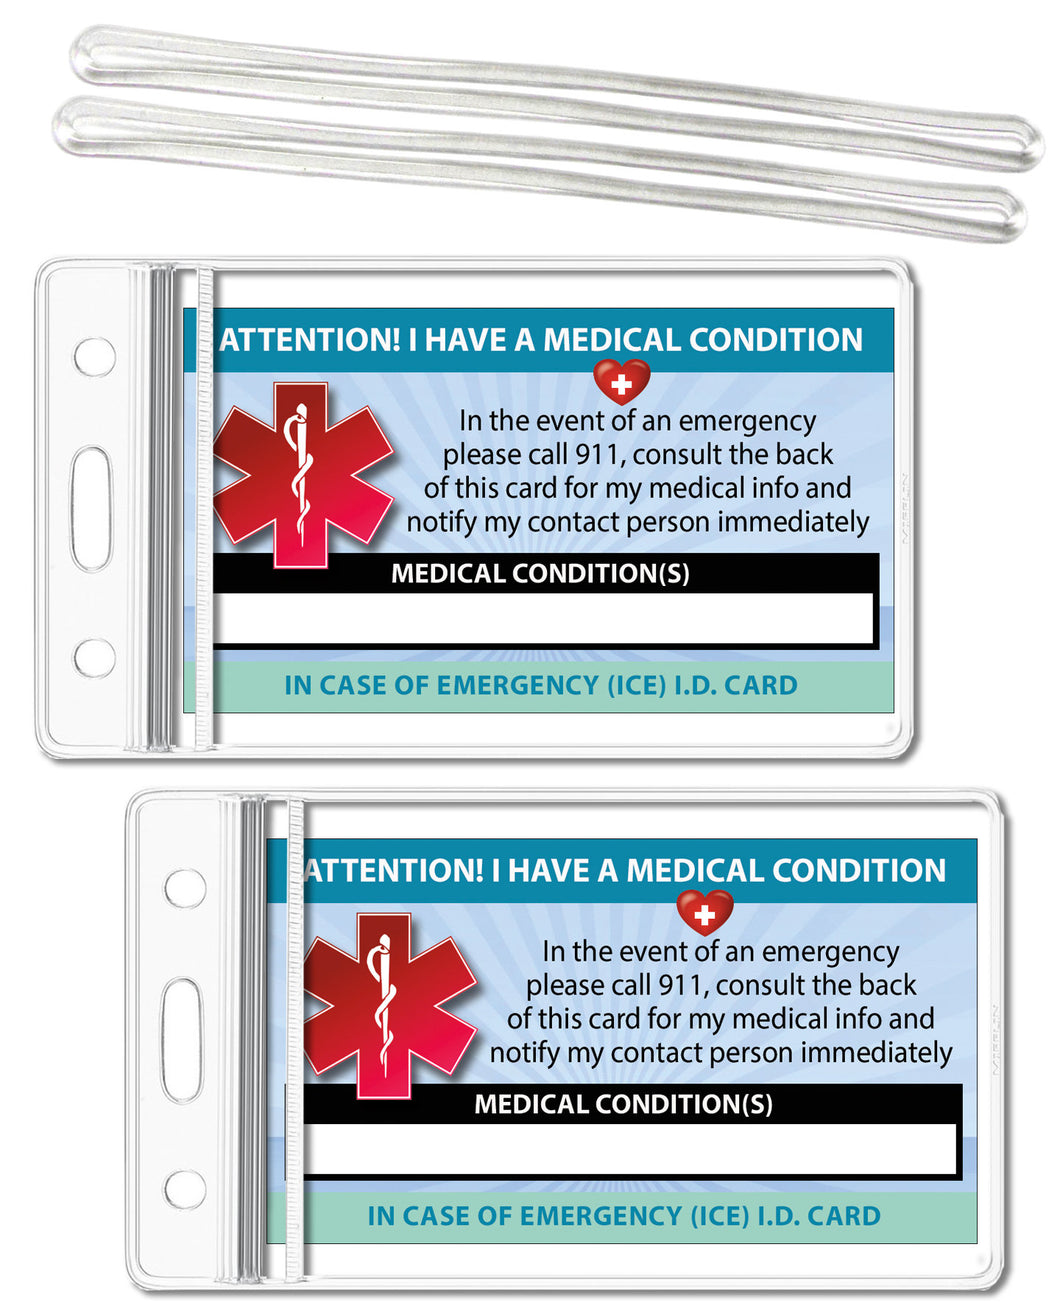 2 Pk. Medical Condition ICE Heavy Weight Cardstock Alert Emergency I.D. Identification Contact Card - Self Laminate or Plastic Pouch